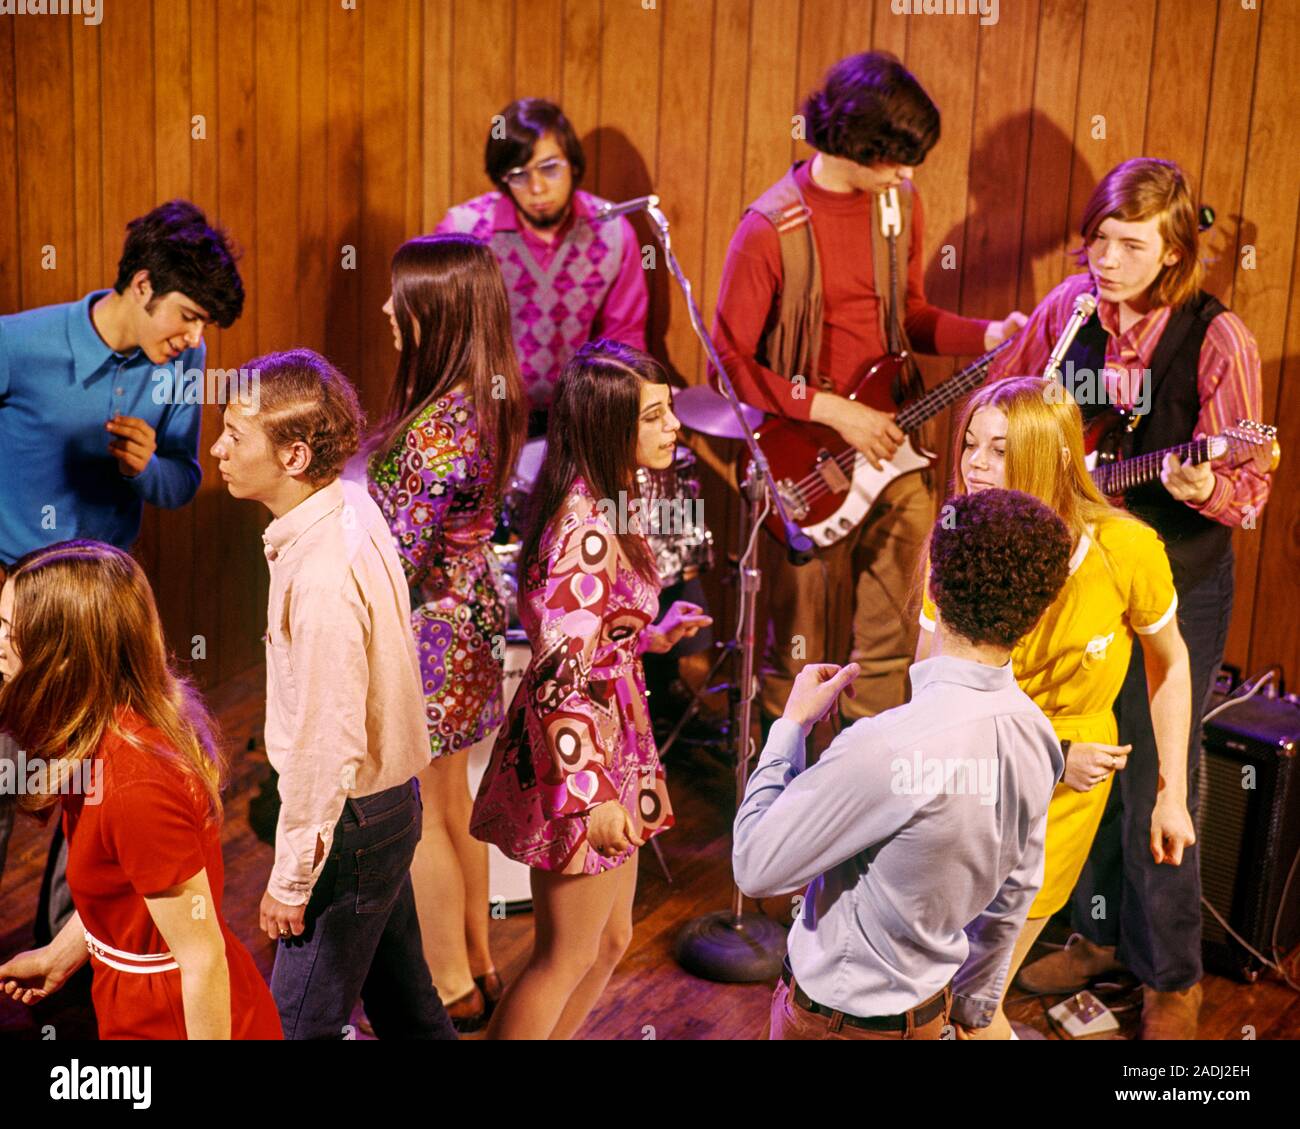 1960s 1970s TEENAGE GIRLS WEARING MINISKIRT DRESSES AND BOYS DANCING ROCK AND ROLL BAND PLAYING ELECTRIC GUITARS AND AMPS - kd2857 PHT001 HARS OLD FASHION JUVENILE STYLE COMMUNICATION JOY LIFESTYLE SOUND SATISFACTION MUSICIAN FEMALES COPY SPACE FRIENDSHIP FULL-LENGTH HALF-LENGTH PERSONS MALES TEENAGE GIRL TEENAGE BOY ENTERTAINMENT DATING DRESSES SCHOOLS PERFORMING ARTS HAPPINESS HIGH ANGLE LEISURE STYLES AND HAIRSTYLE RECREATION ATTRACTION HIGH SCHOOL MUSICAL INSTRUMENT HIGH SCHOOLS CONNECTION COURTSHIP CONCEPTUAL 10 STYLISH TEENAGED MINISKIRTS POSSIBILITY ROCK AND ROLL AMPS COOPERATION Stock Photo